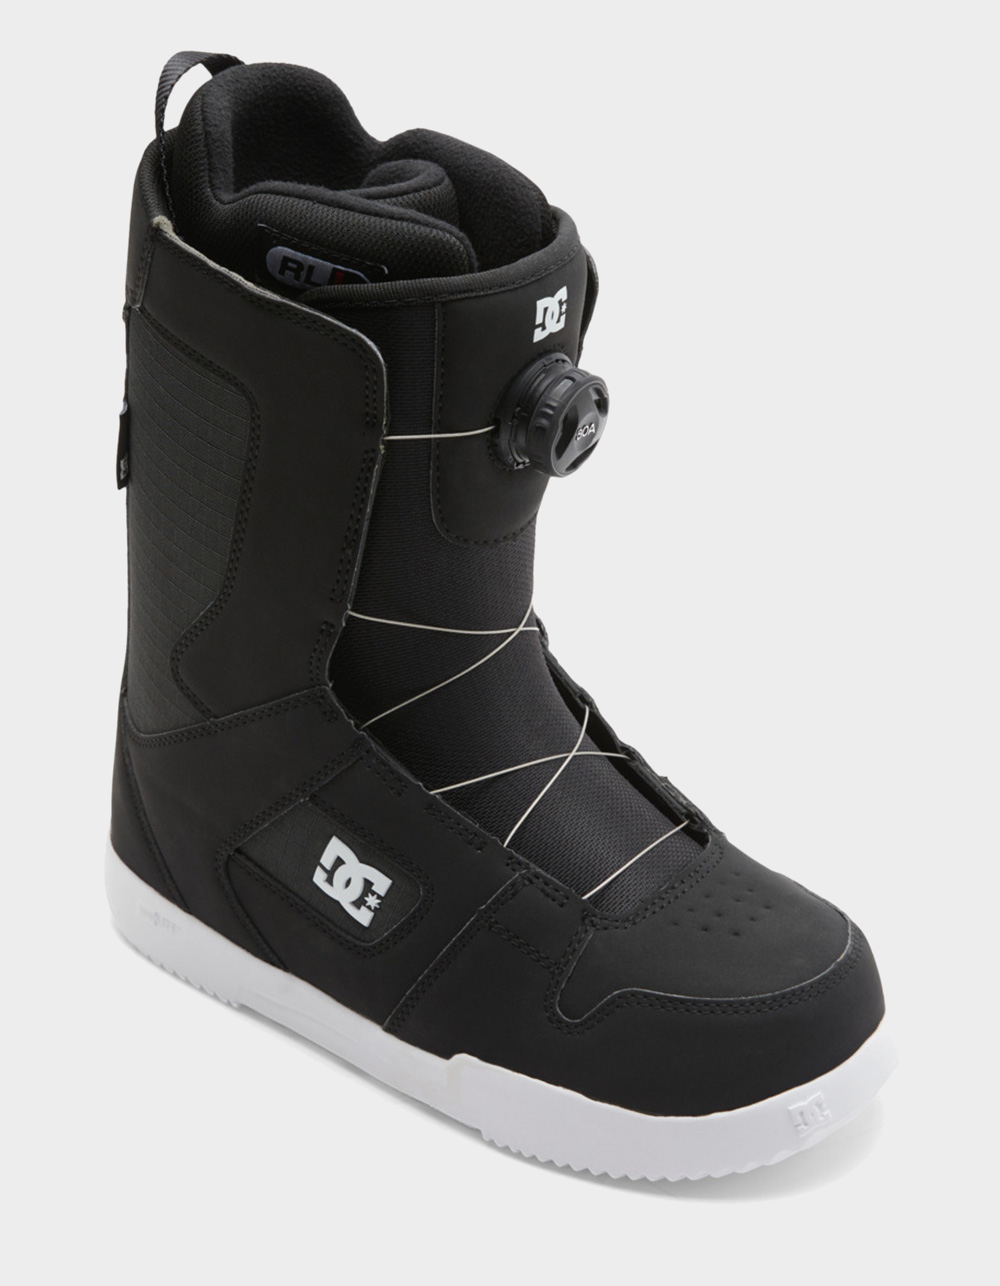 DC SHOES Phase BOA® Mens Snowboard Boots